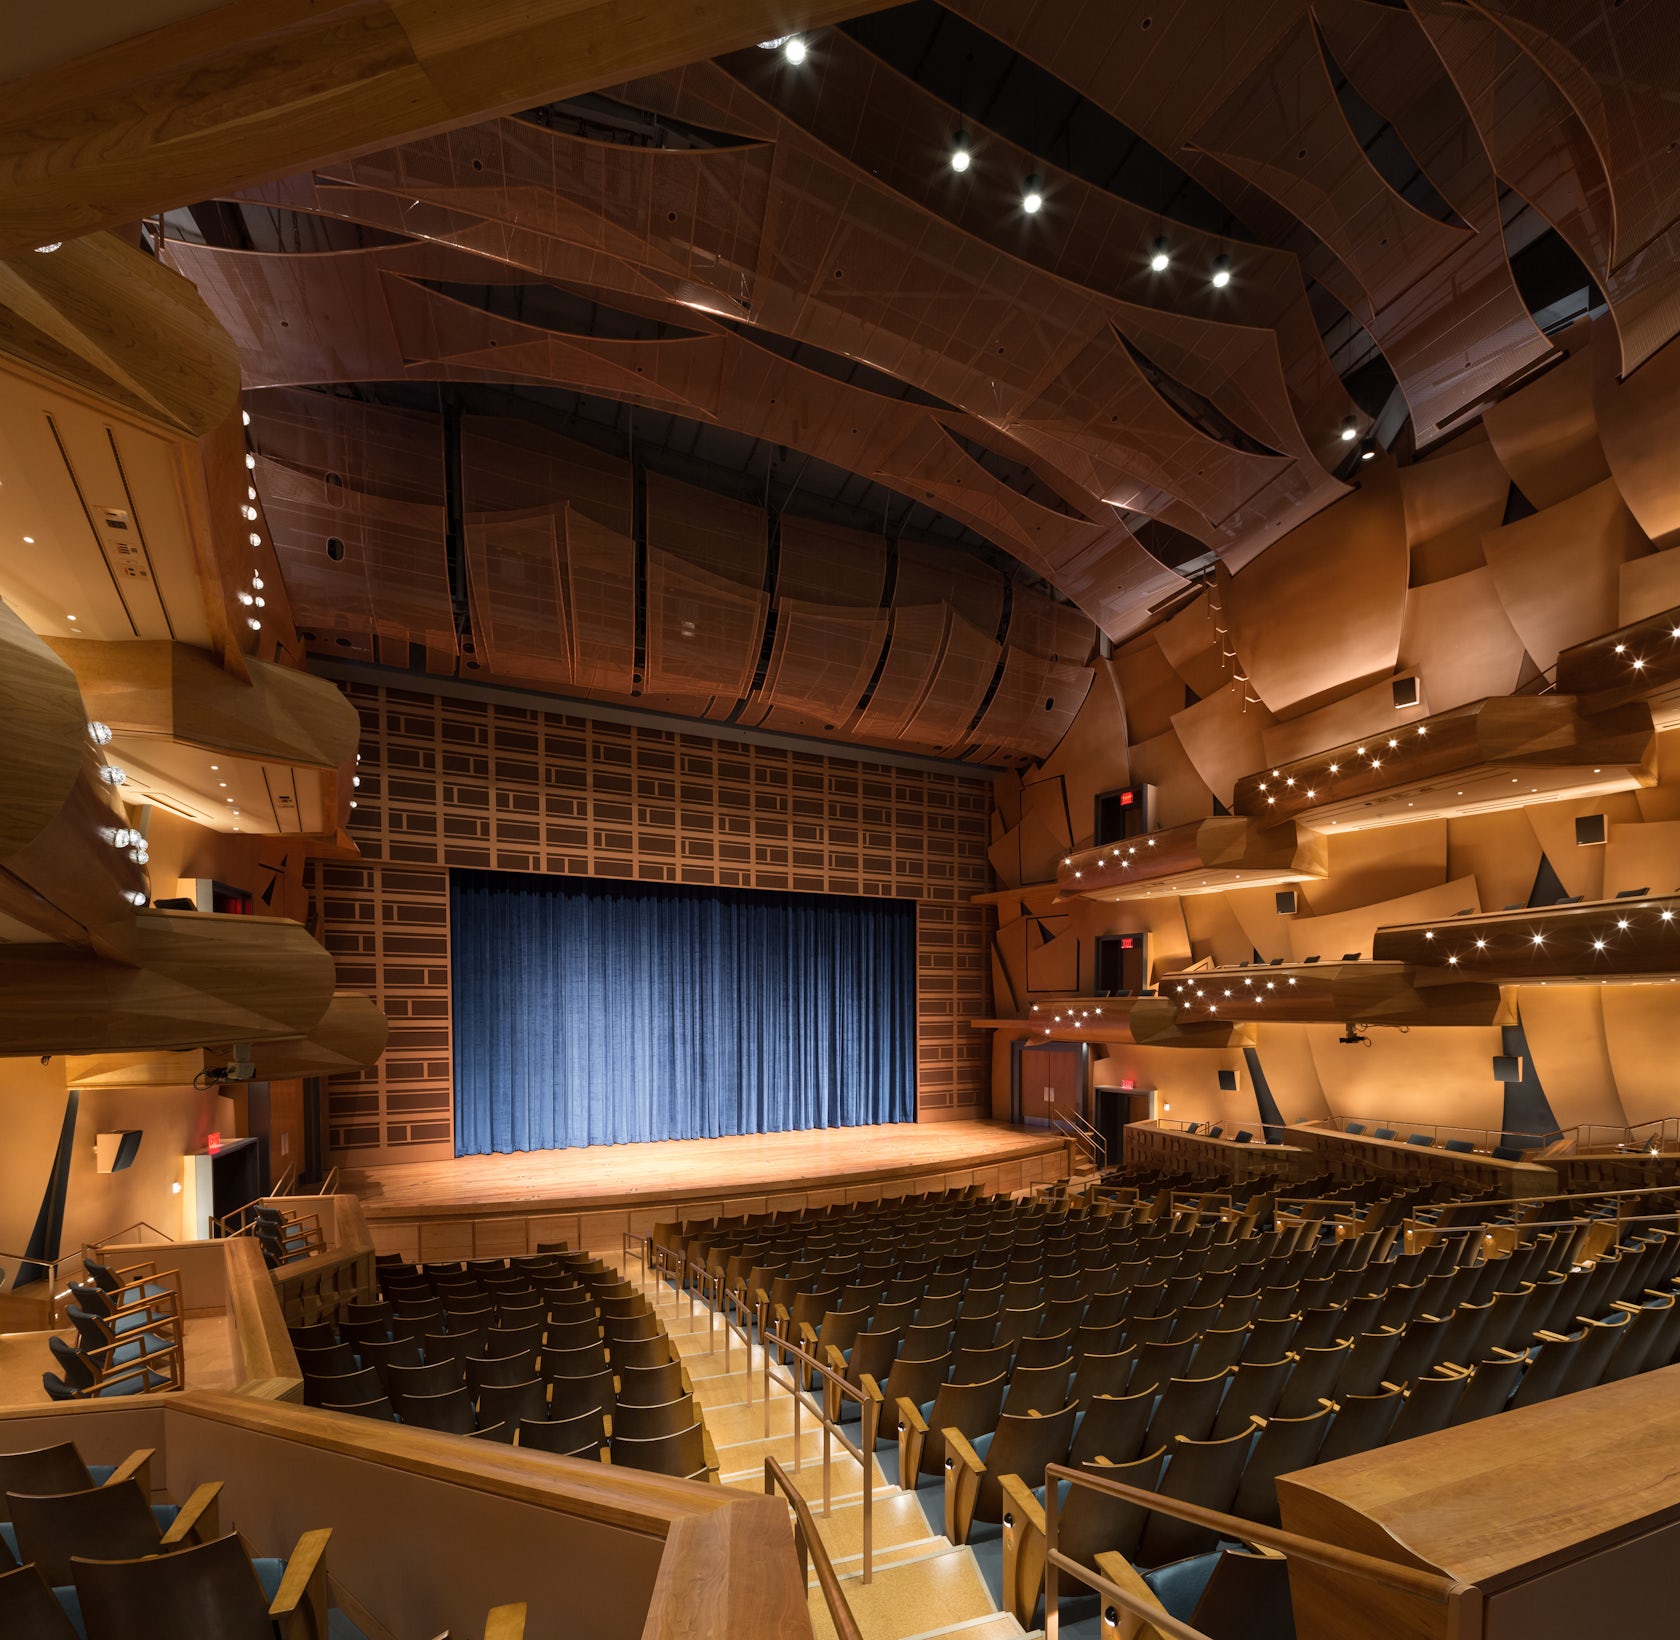 Chapman University Musco Center for the Arts by Pfeiffer, a Perkins